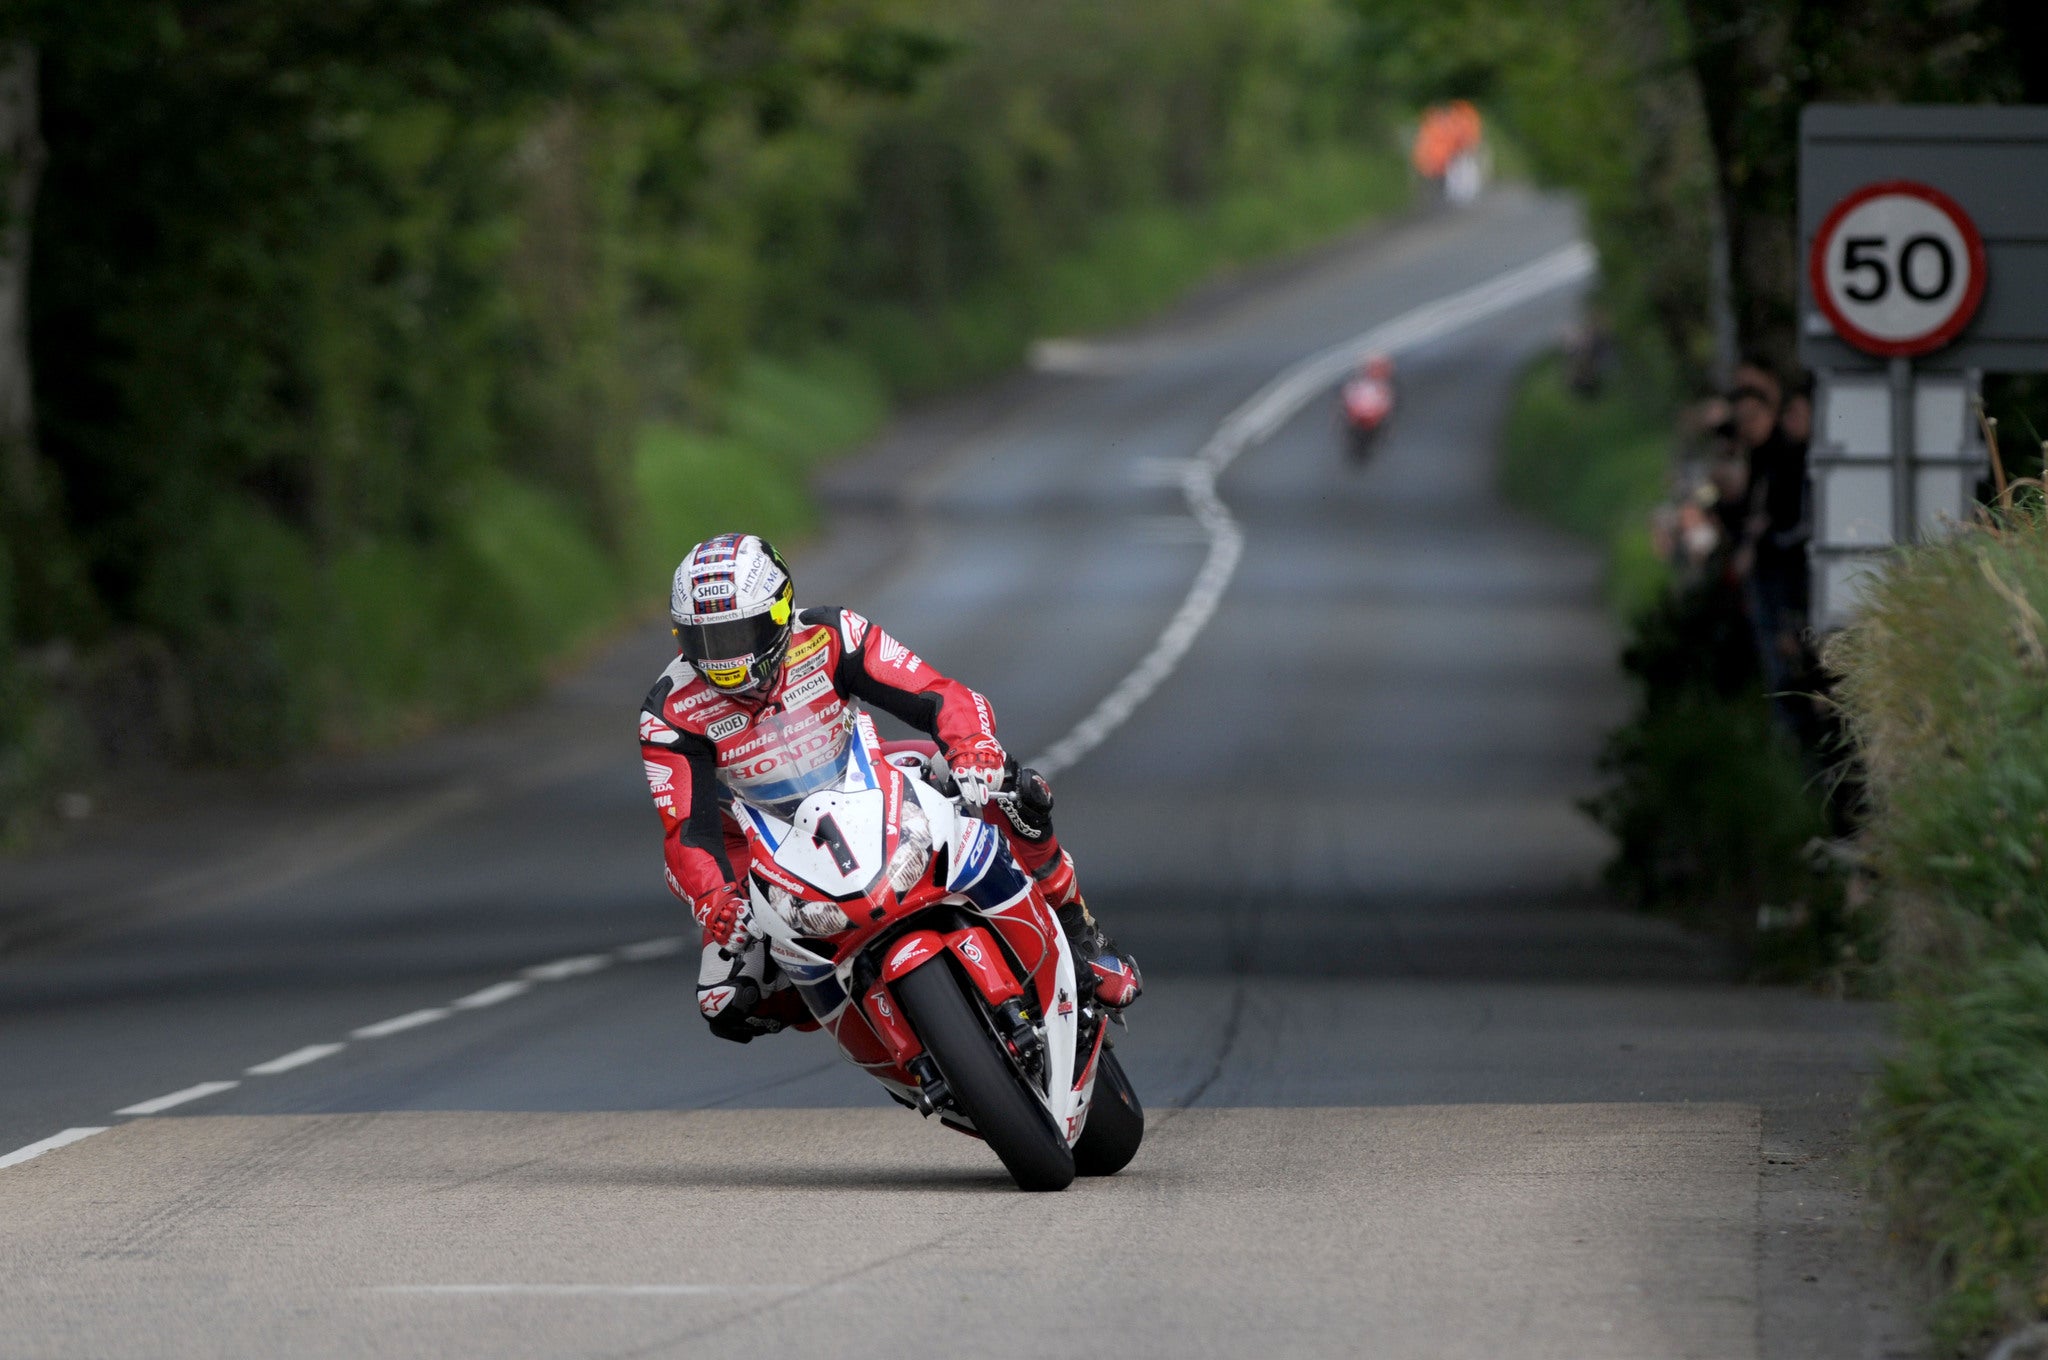 McGuinness finished fourth in Sunday's Superbike race